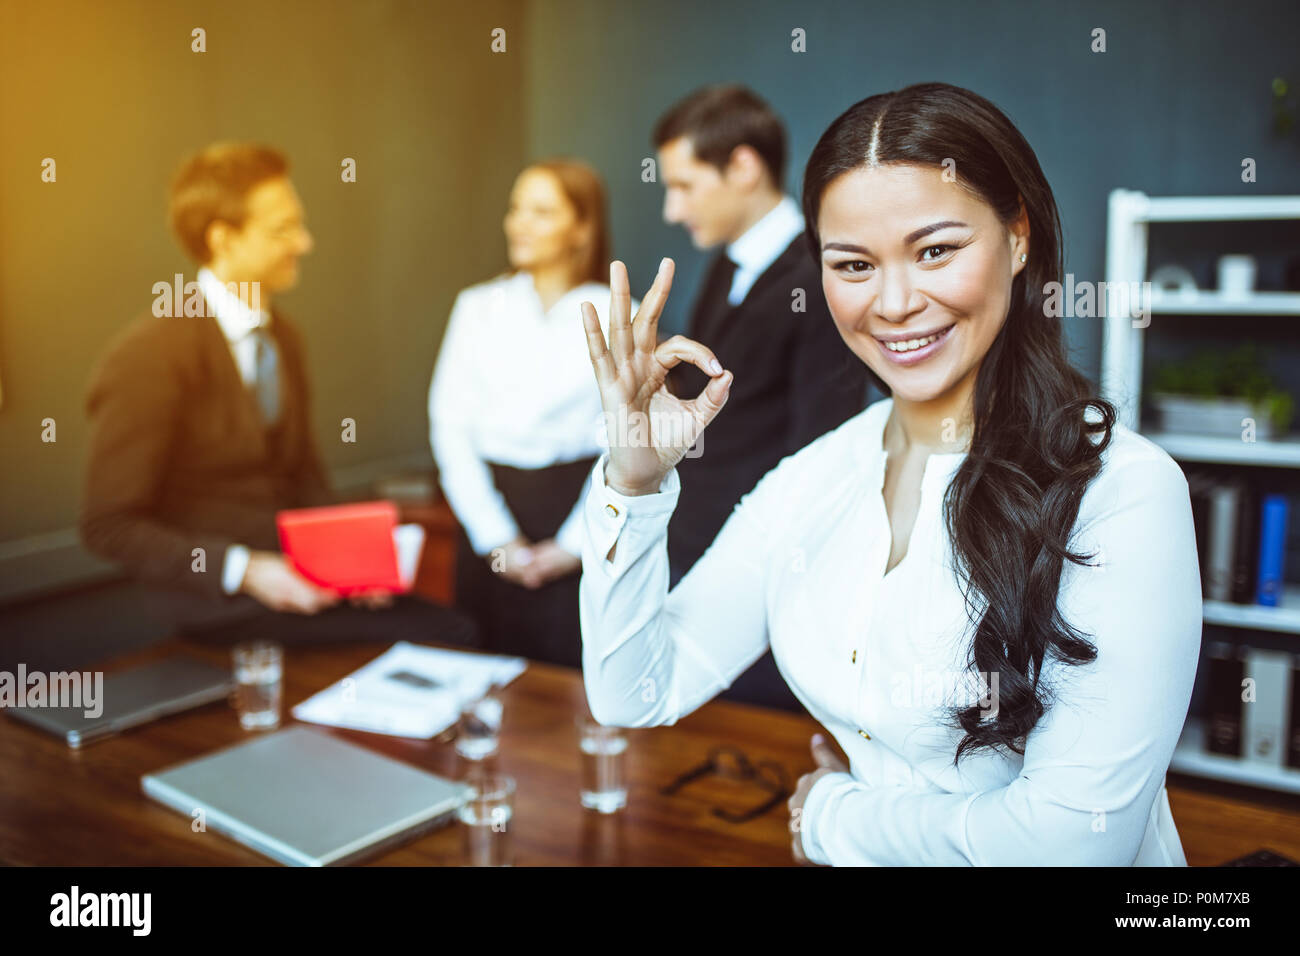 Modern business woman in business meeting Stock Photo